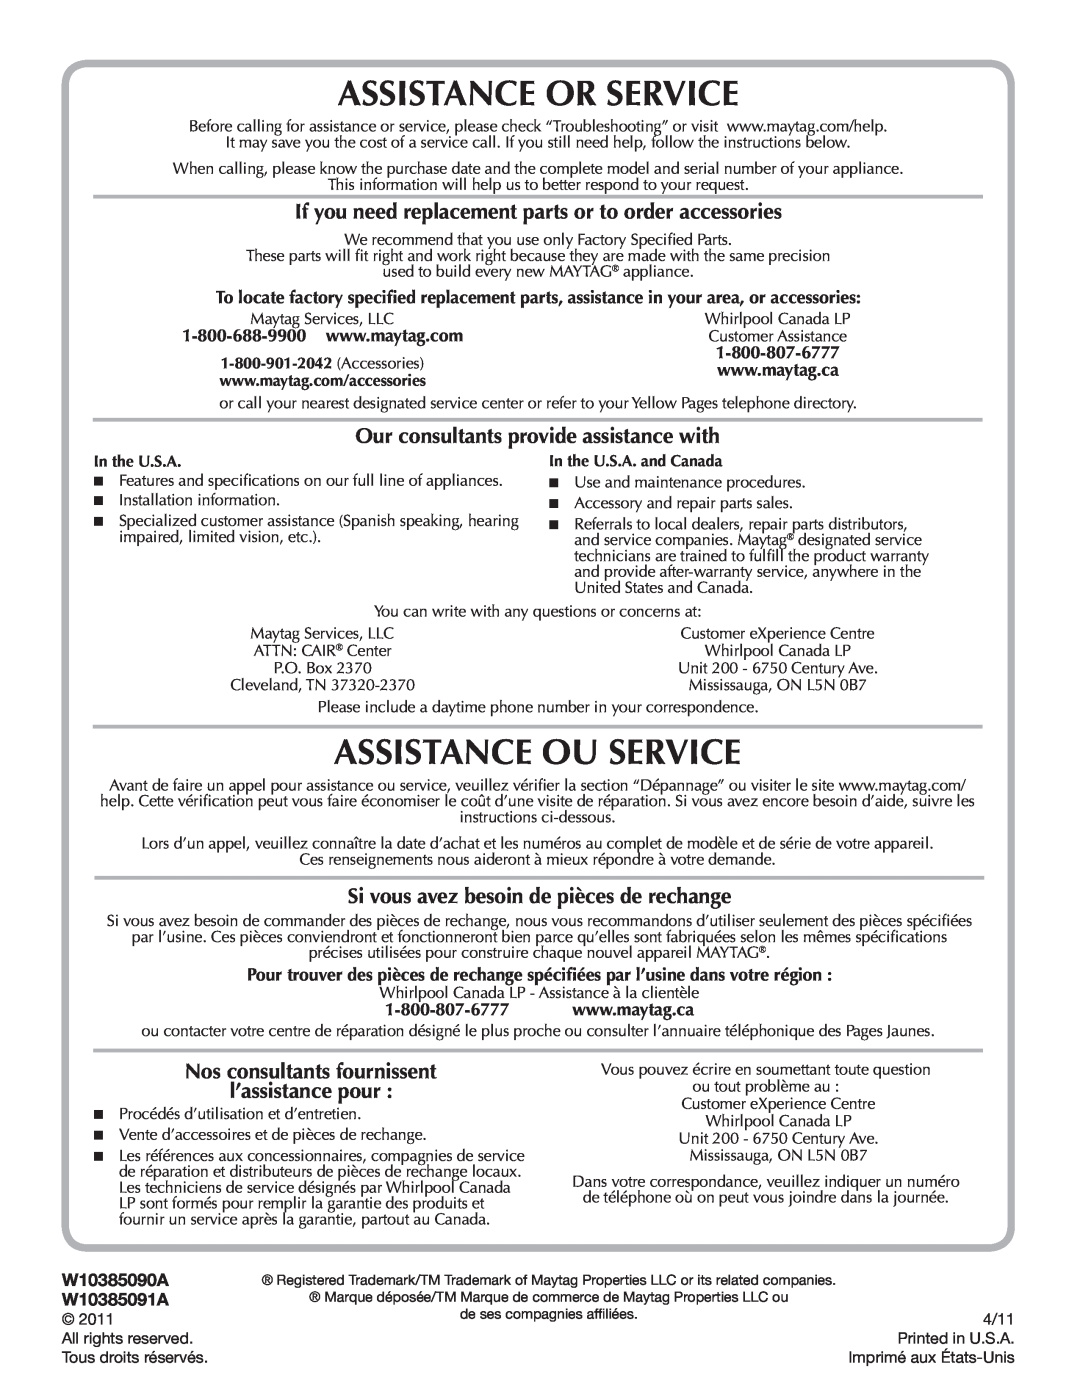 Maytag W10385090A AssistAnce or service, AssistAnce oU service, if you need replacement parts or to order accessories 